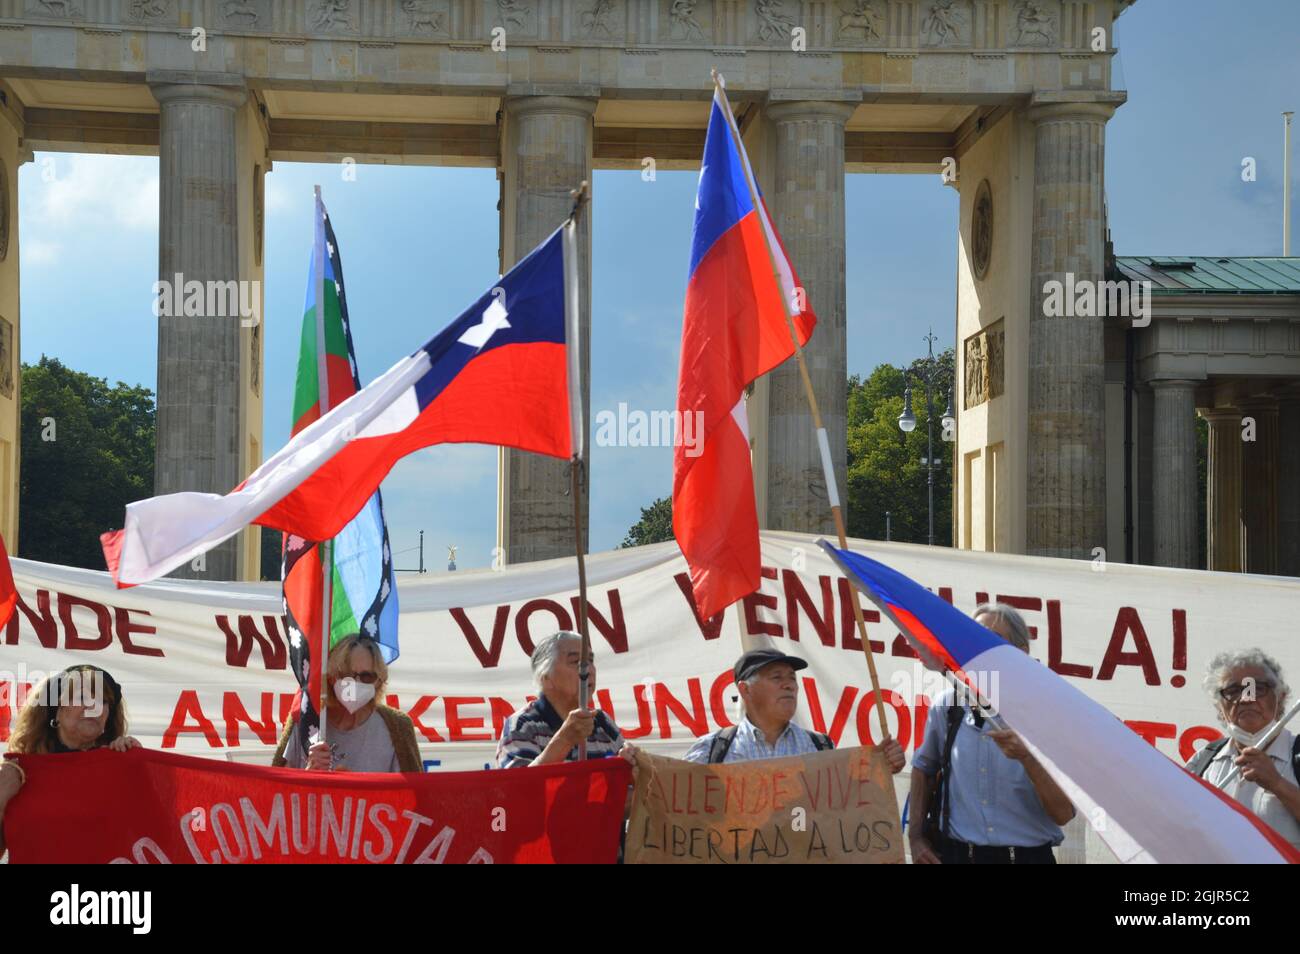 The 48th anniversary of the military coup in Chile - Demonstration at Pariser Platz square in front of the Brandenburg Gate in Berlin, Germany - September 11, 2021. Stock Photo